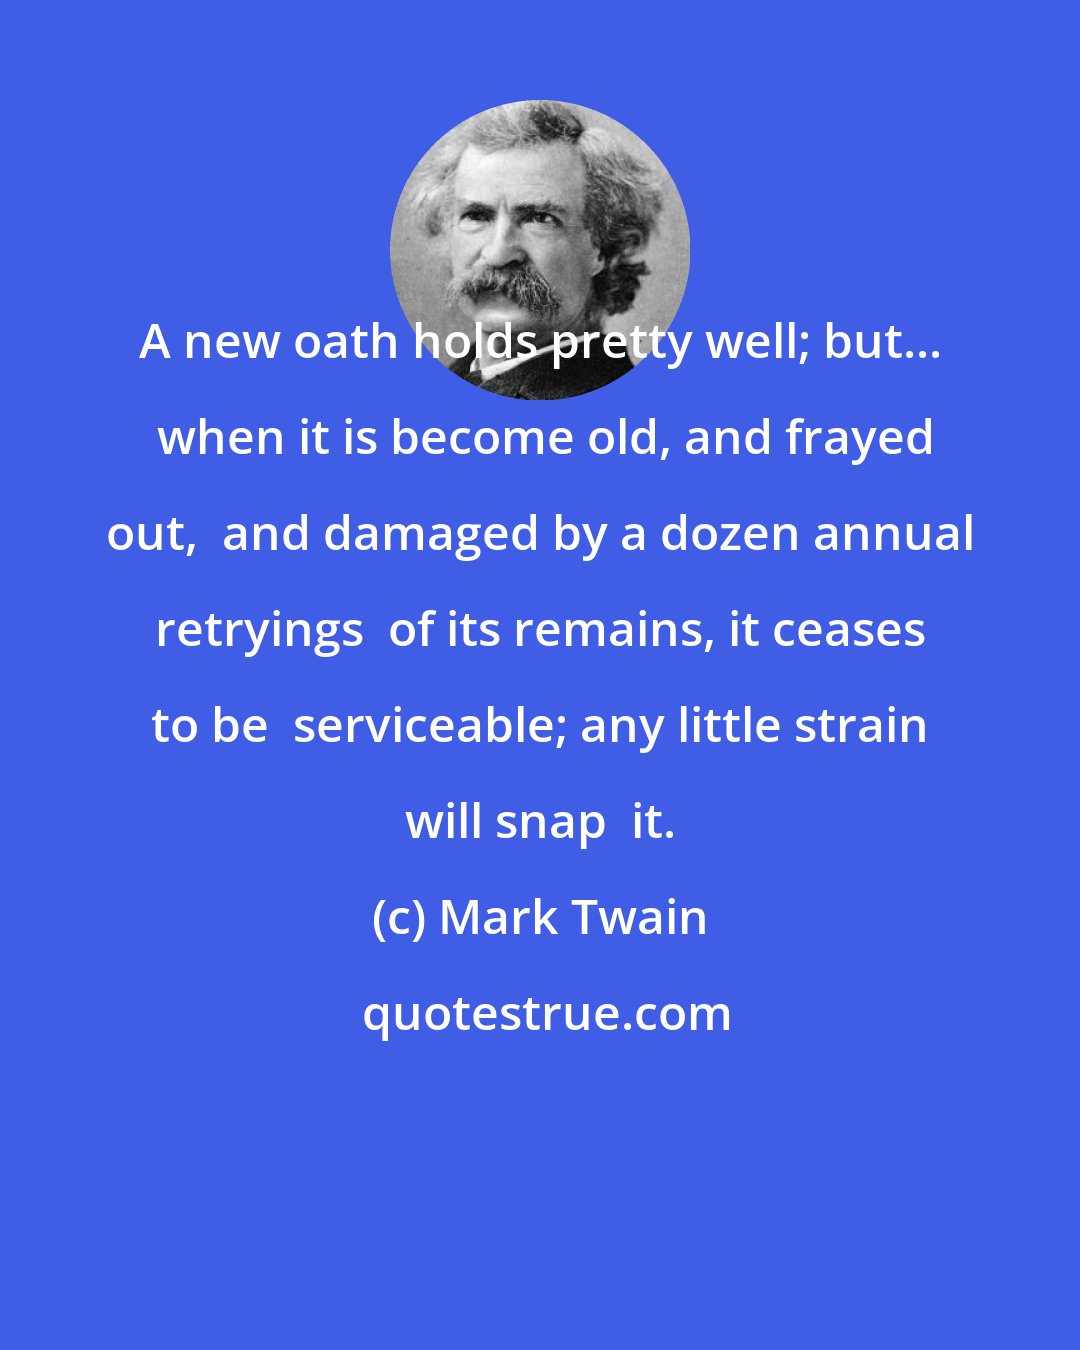 Mark Twain: A new oath holds pretty well; but...  when it is become old, and frayed out,  and damaged by a dozen annual retryings  of its remains, it ceases to be  serviceable; any little strain will snap  it.